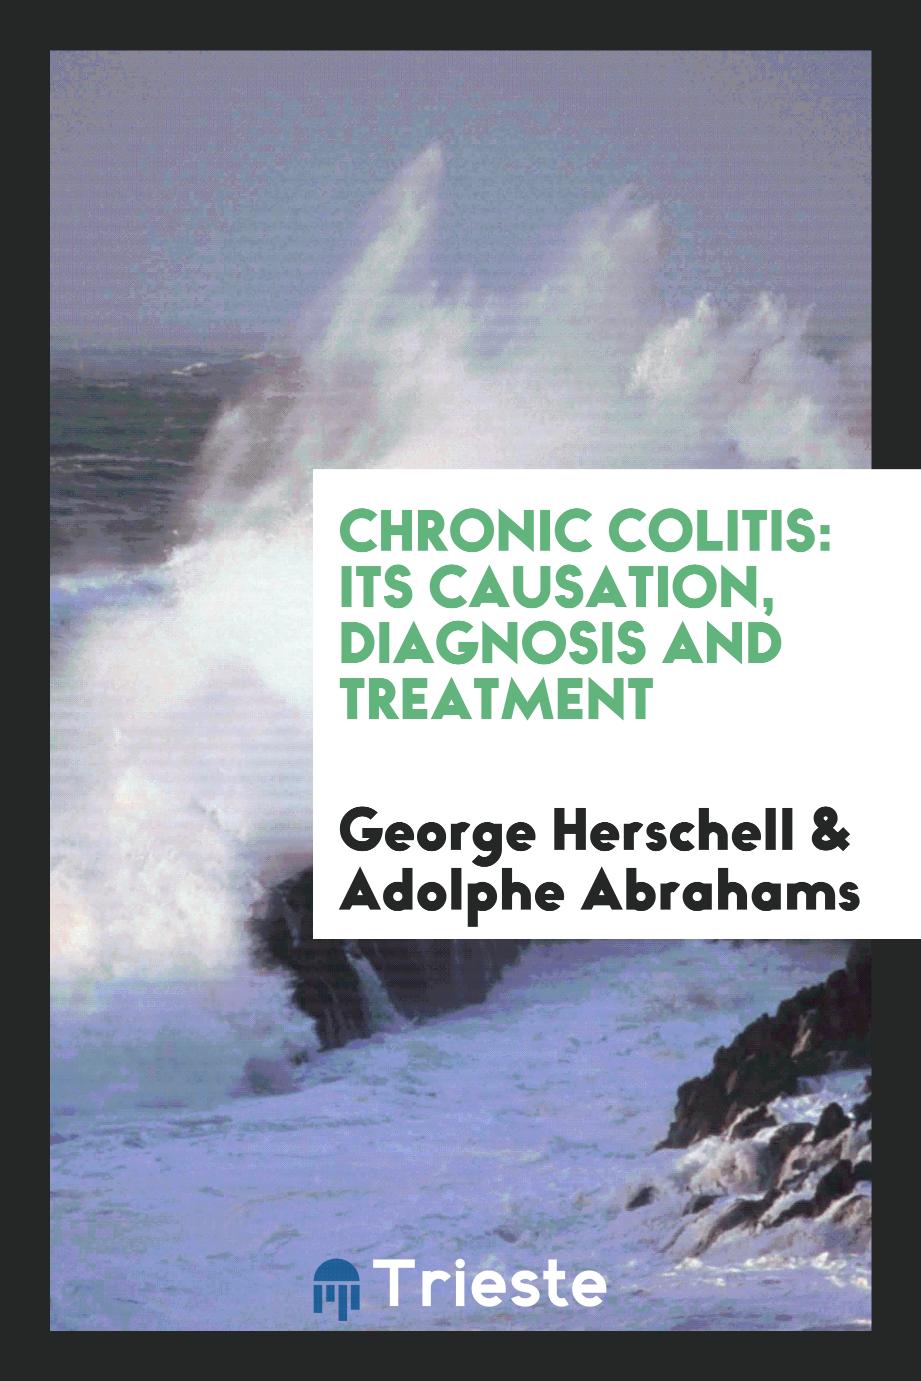 Chronic colitis: its causation, diagnosis and treatment